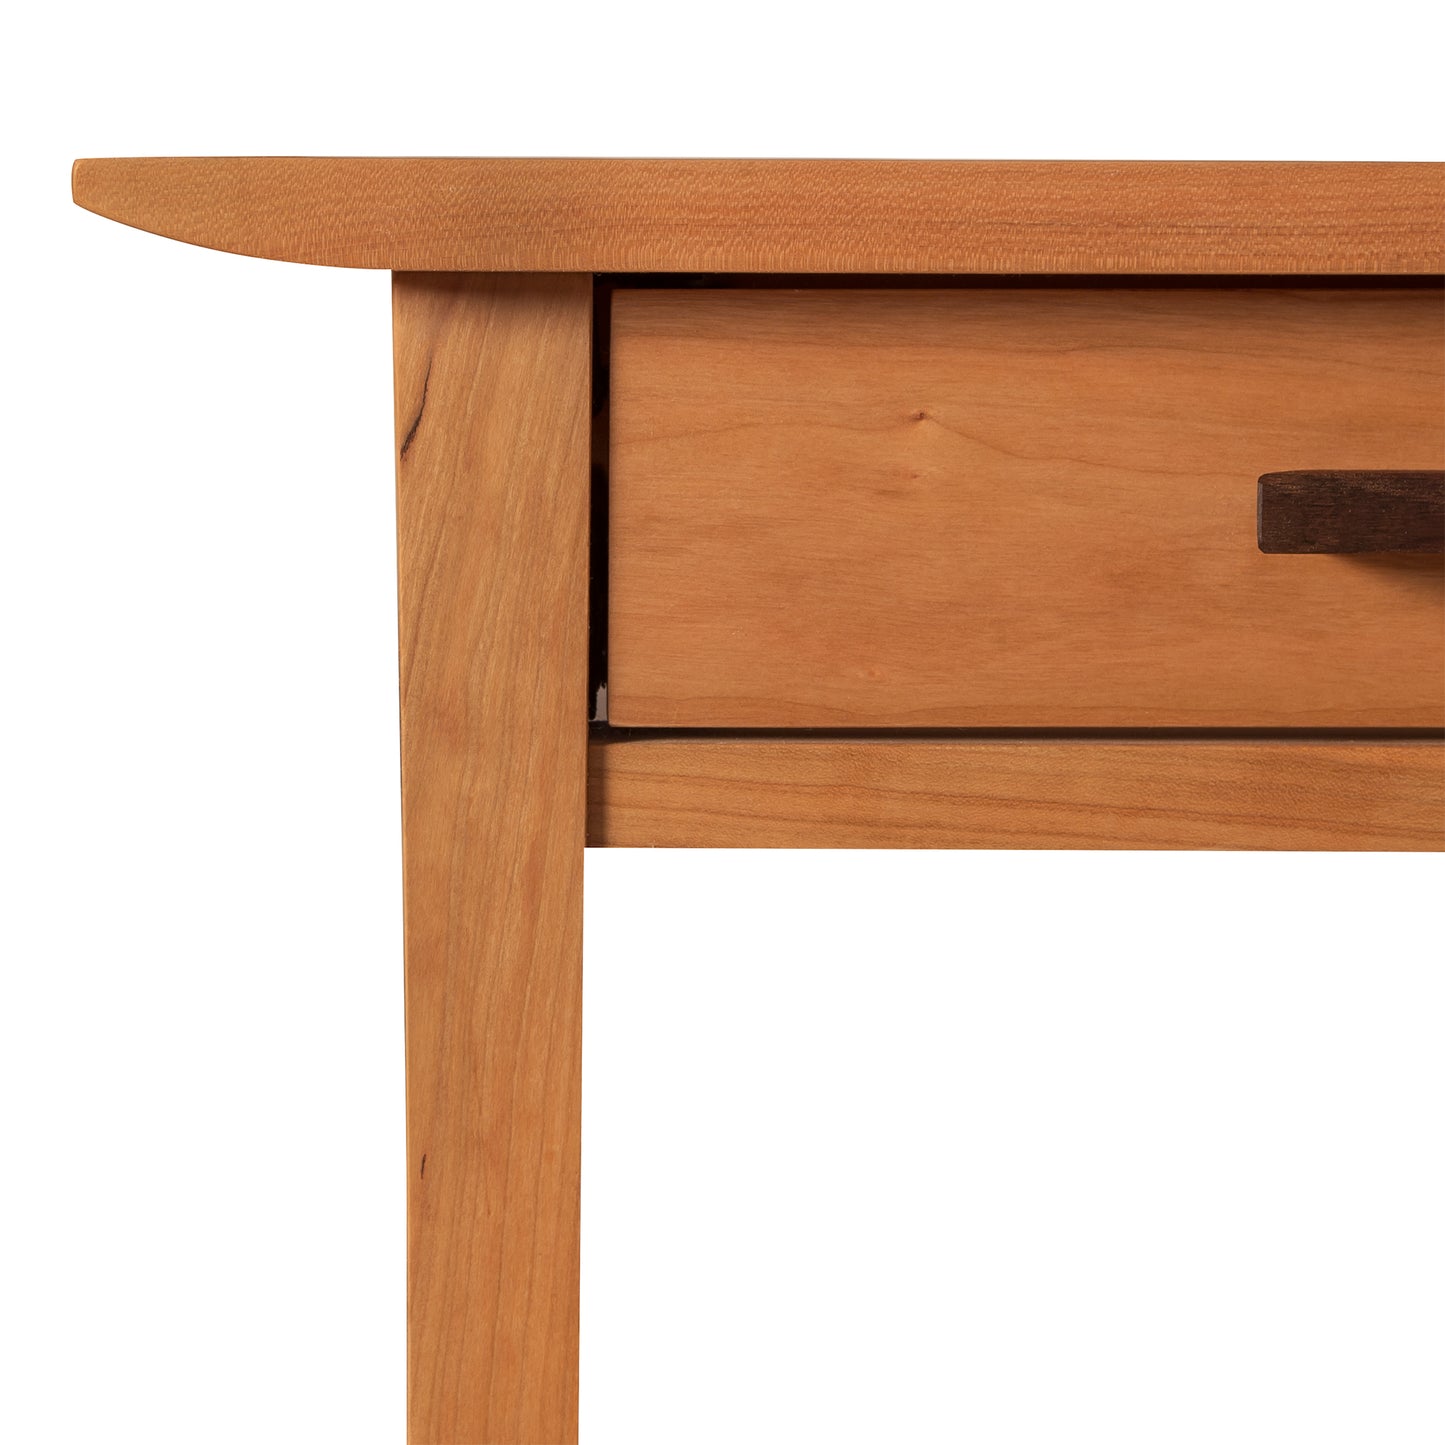 A small Vermont Furniture Designs wooden table with a drawer, featuring Contemporary Craftsman styling.